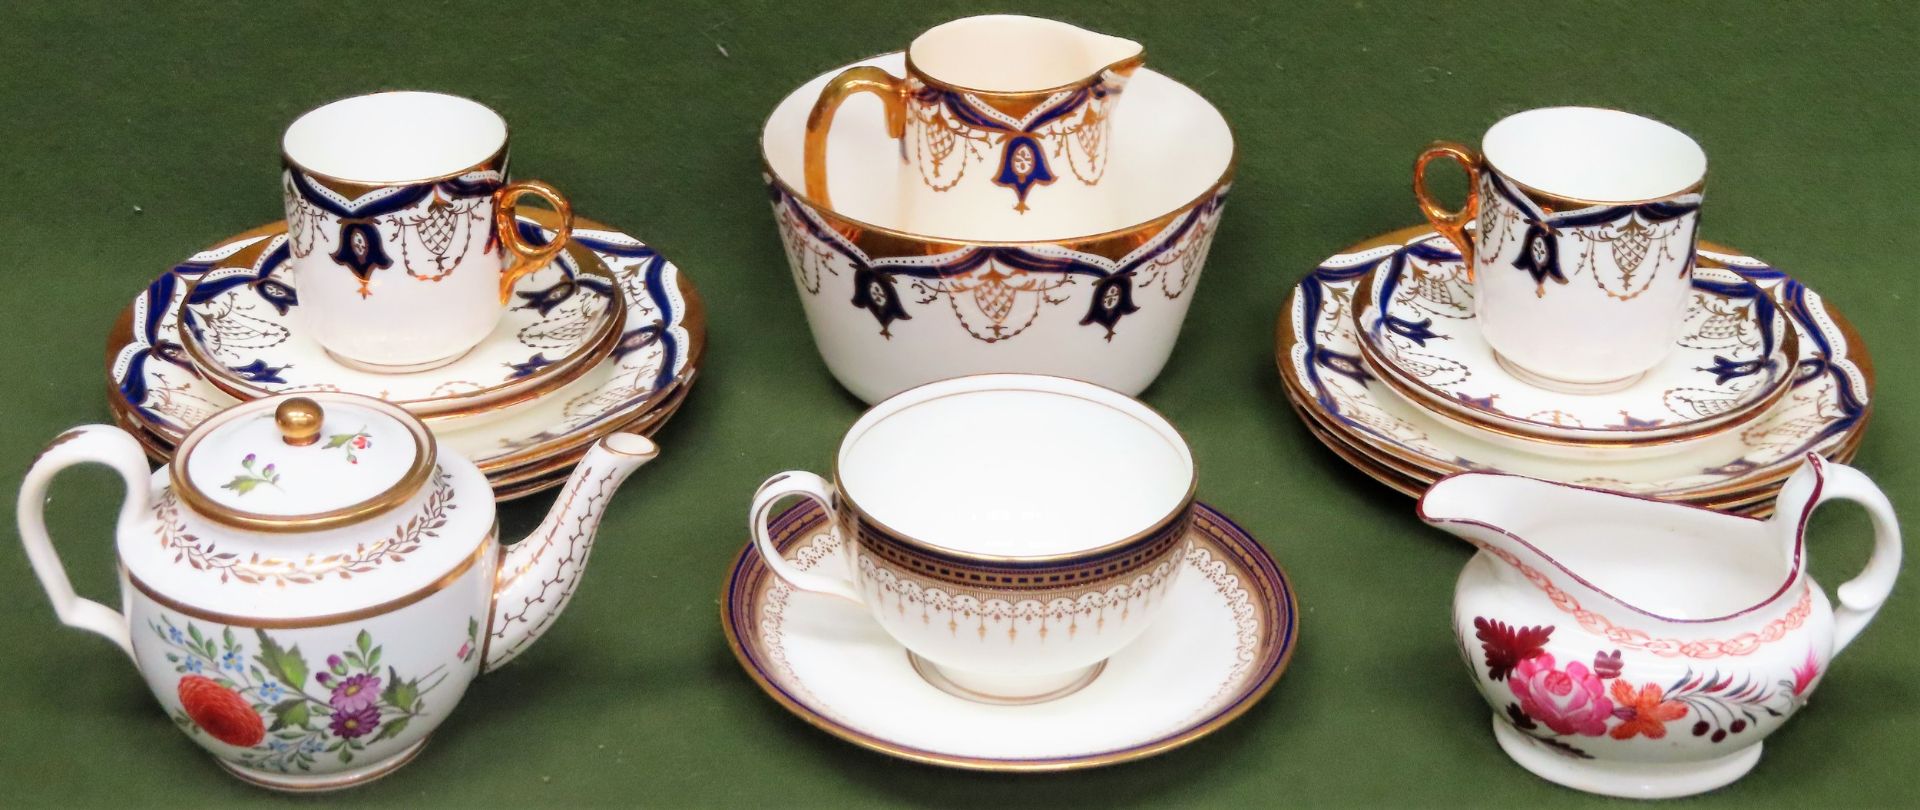 Parcel of antique English ceramics including cups and saucers, teaware, teapot etc All in used